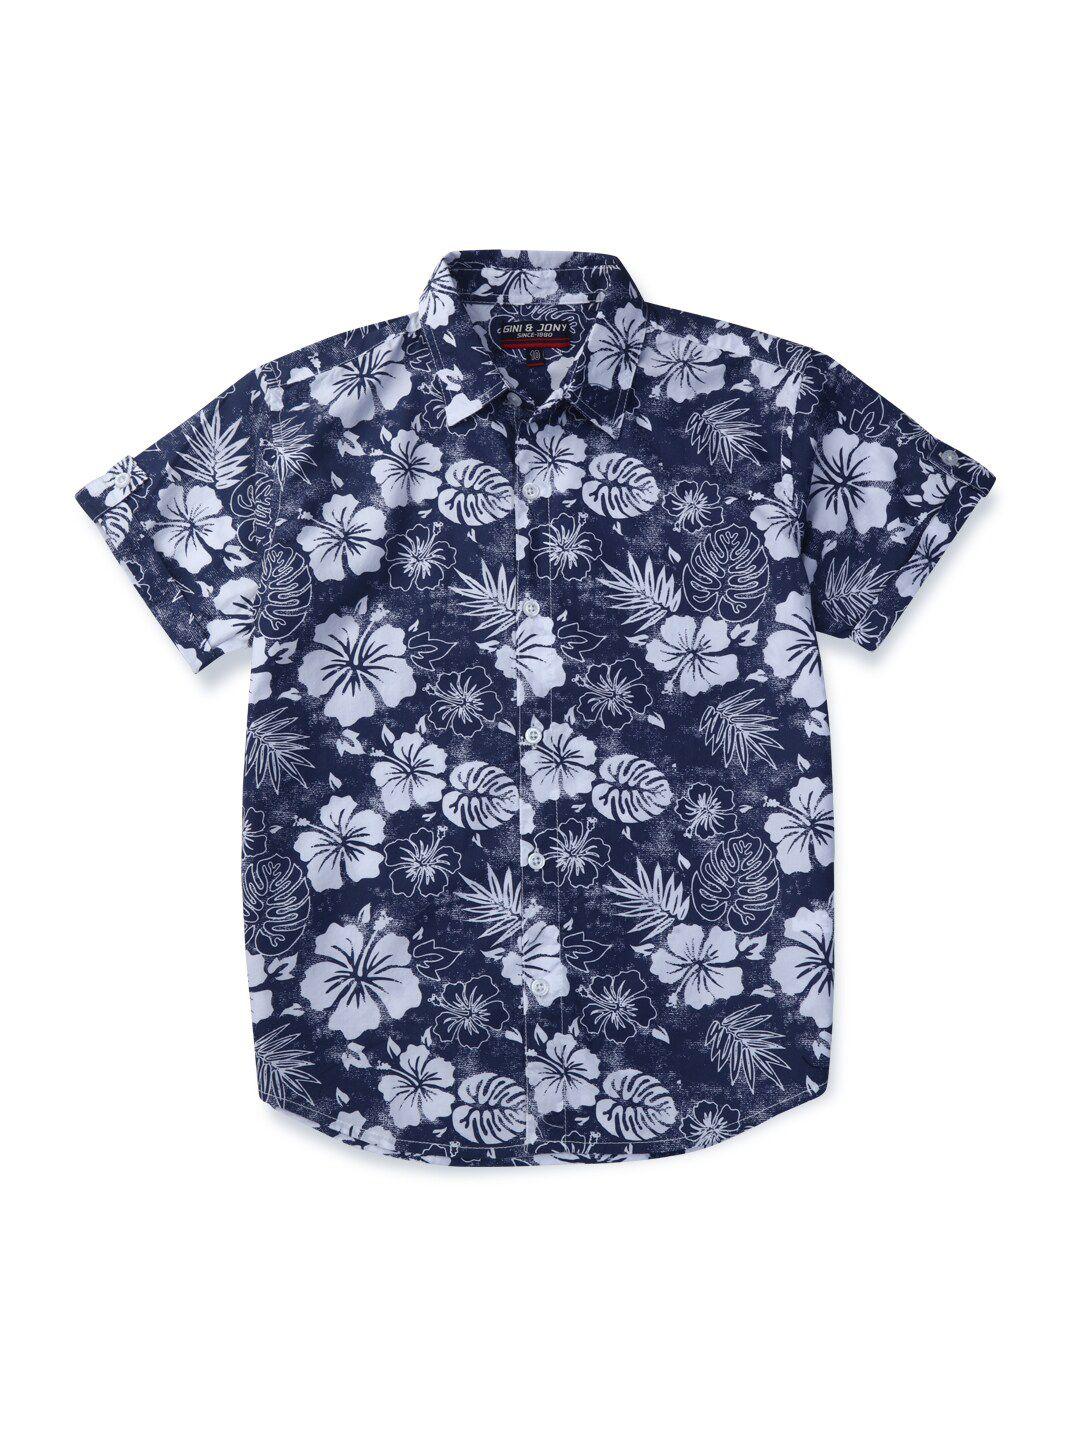 gini-and-jony-boys-floral-printed-casual-shirt